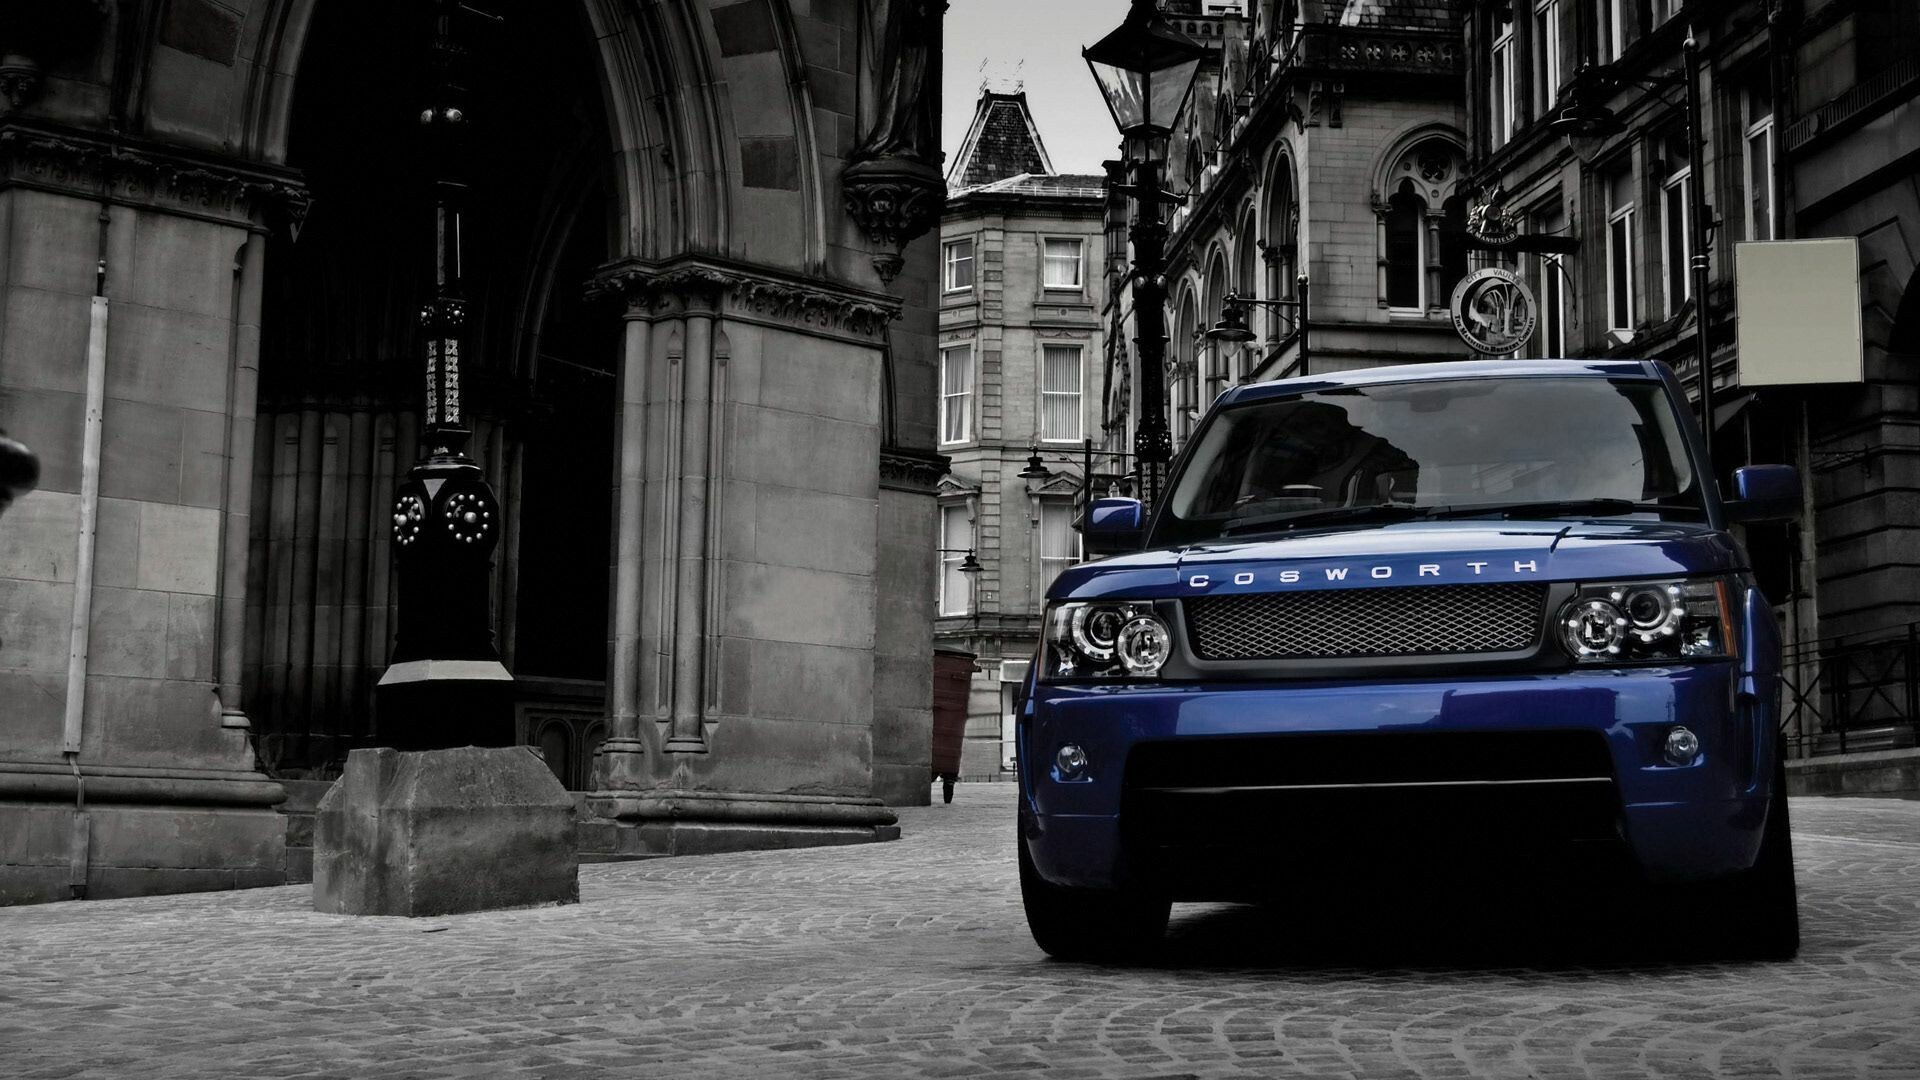 Range Rover: The fourth generation uses an all-aluminium monocoque unitary body structure. 1920x1080 Full HD Wallpaper.